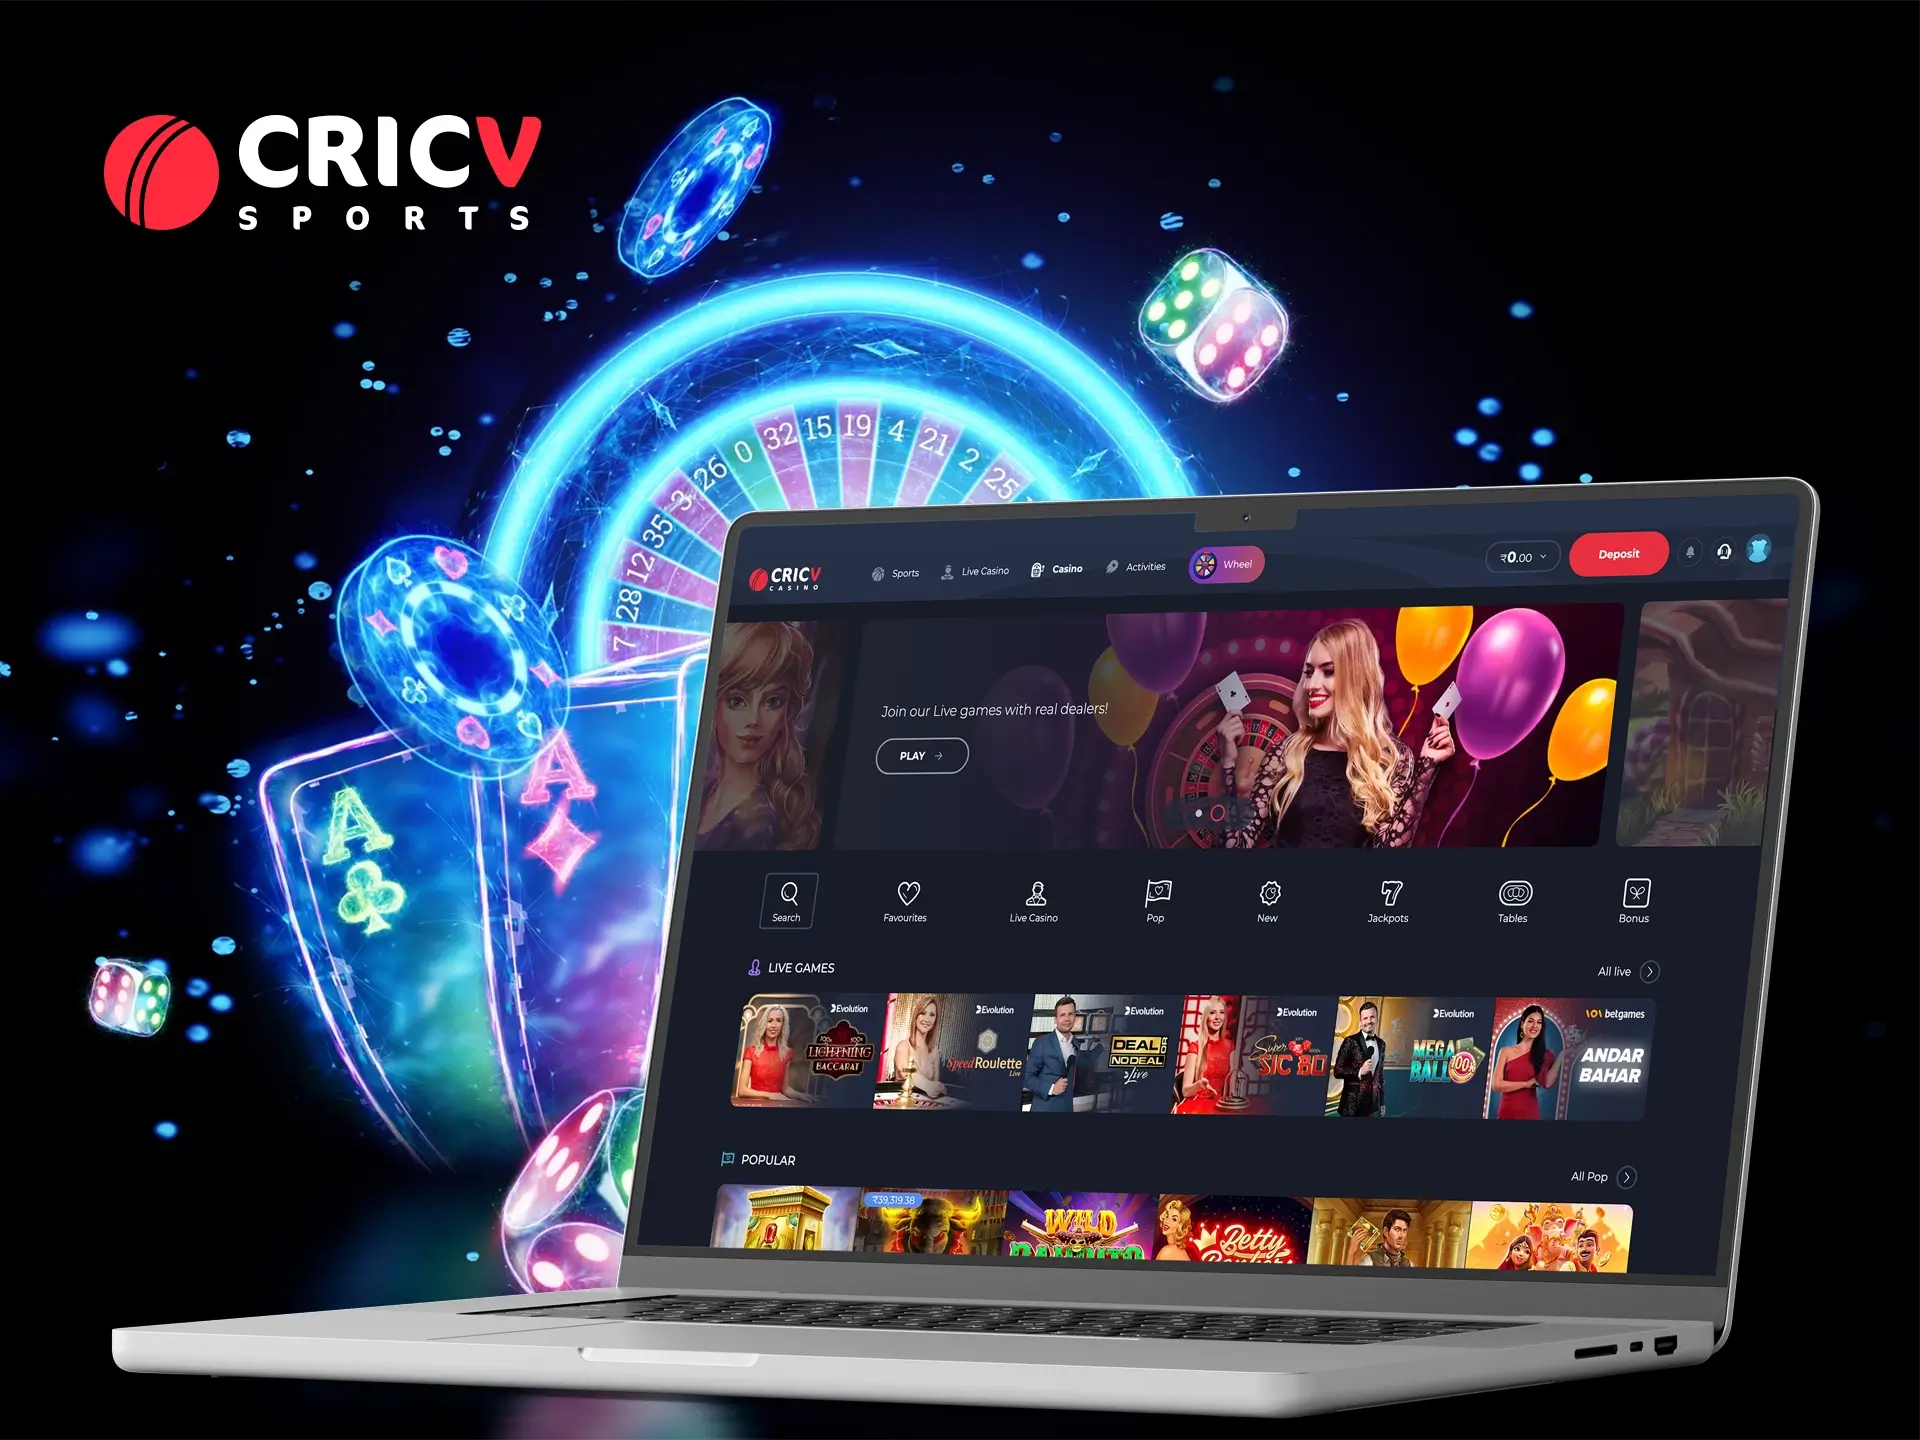 The Cricv site has a filter with popular casino games, pick one that suits you and go for the wins.